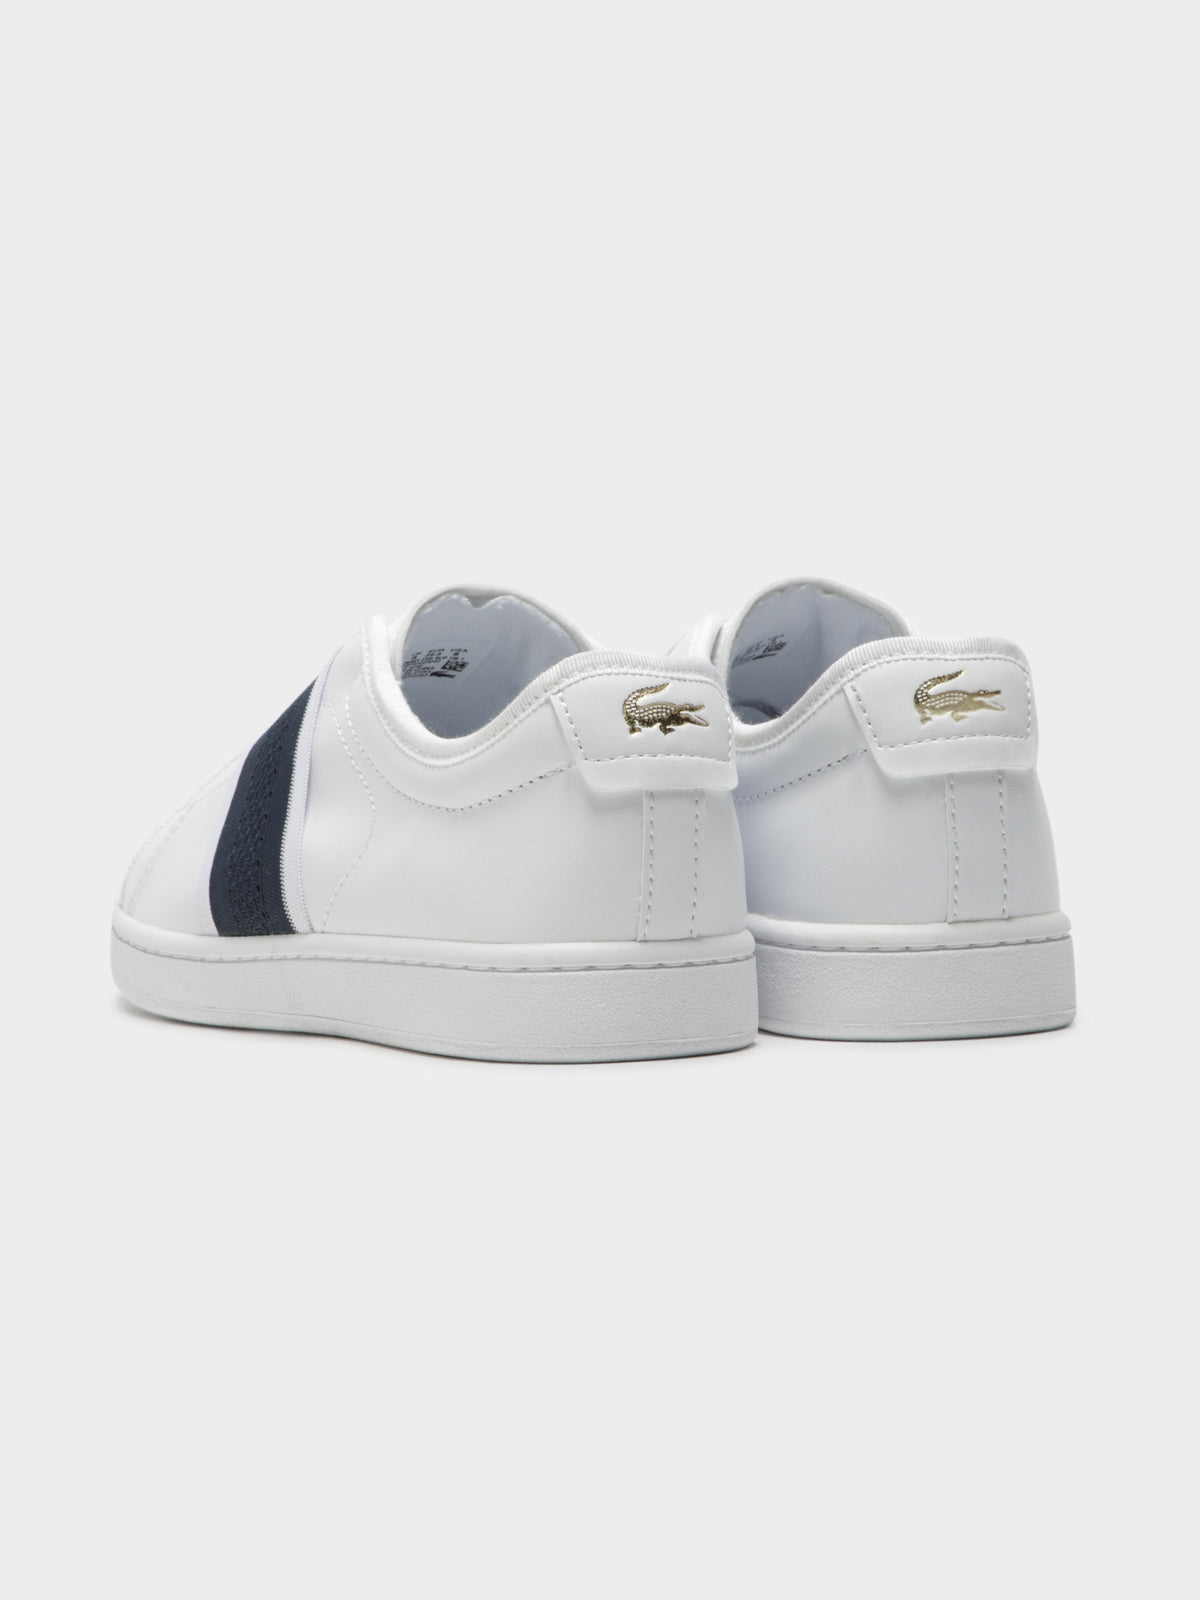 Womens Carnaby Evo Slip 119 Sneakers in White and Navy